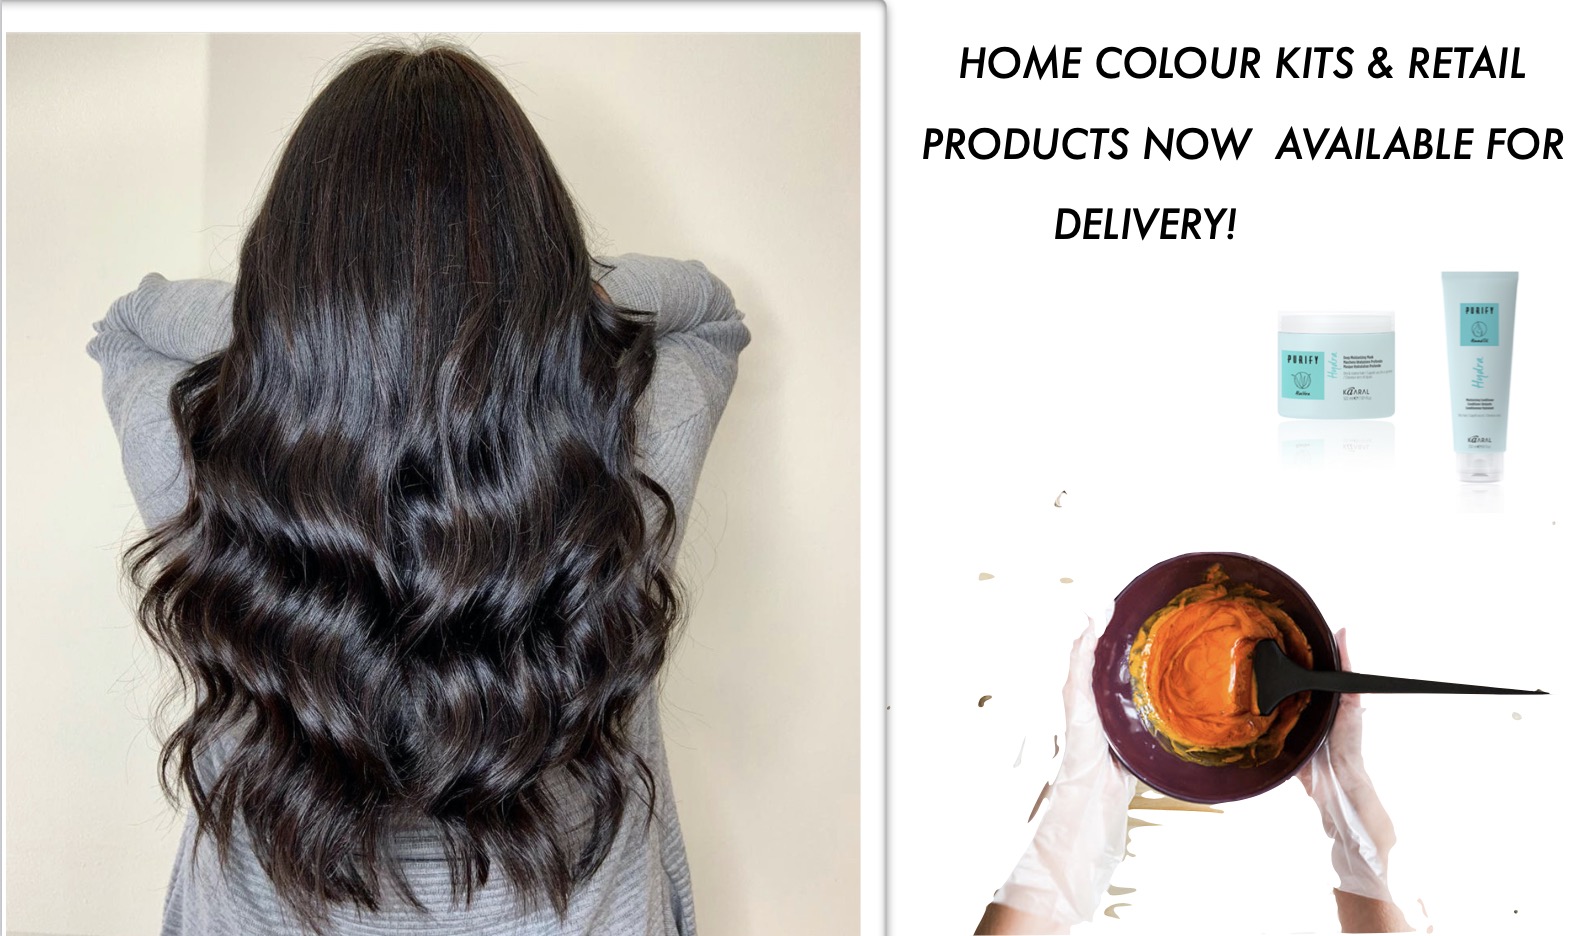 Home Colour Kits & Retail Product Delivery - Pino Salon